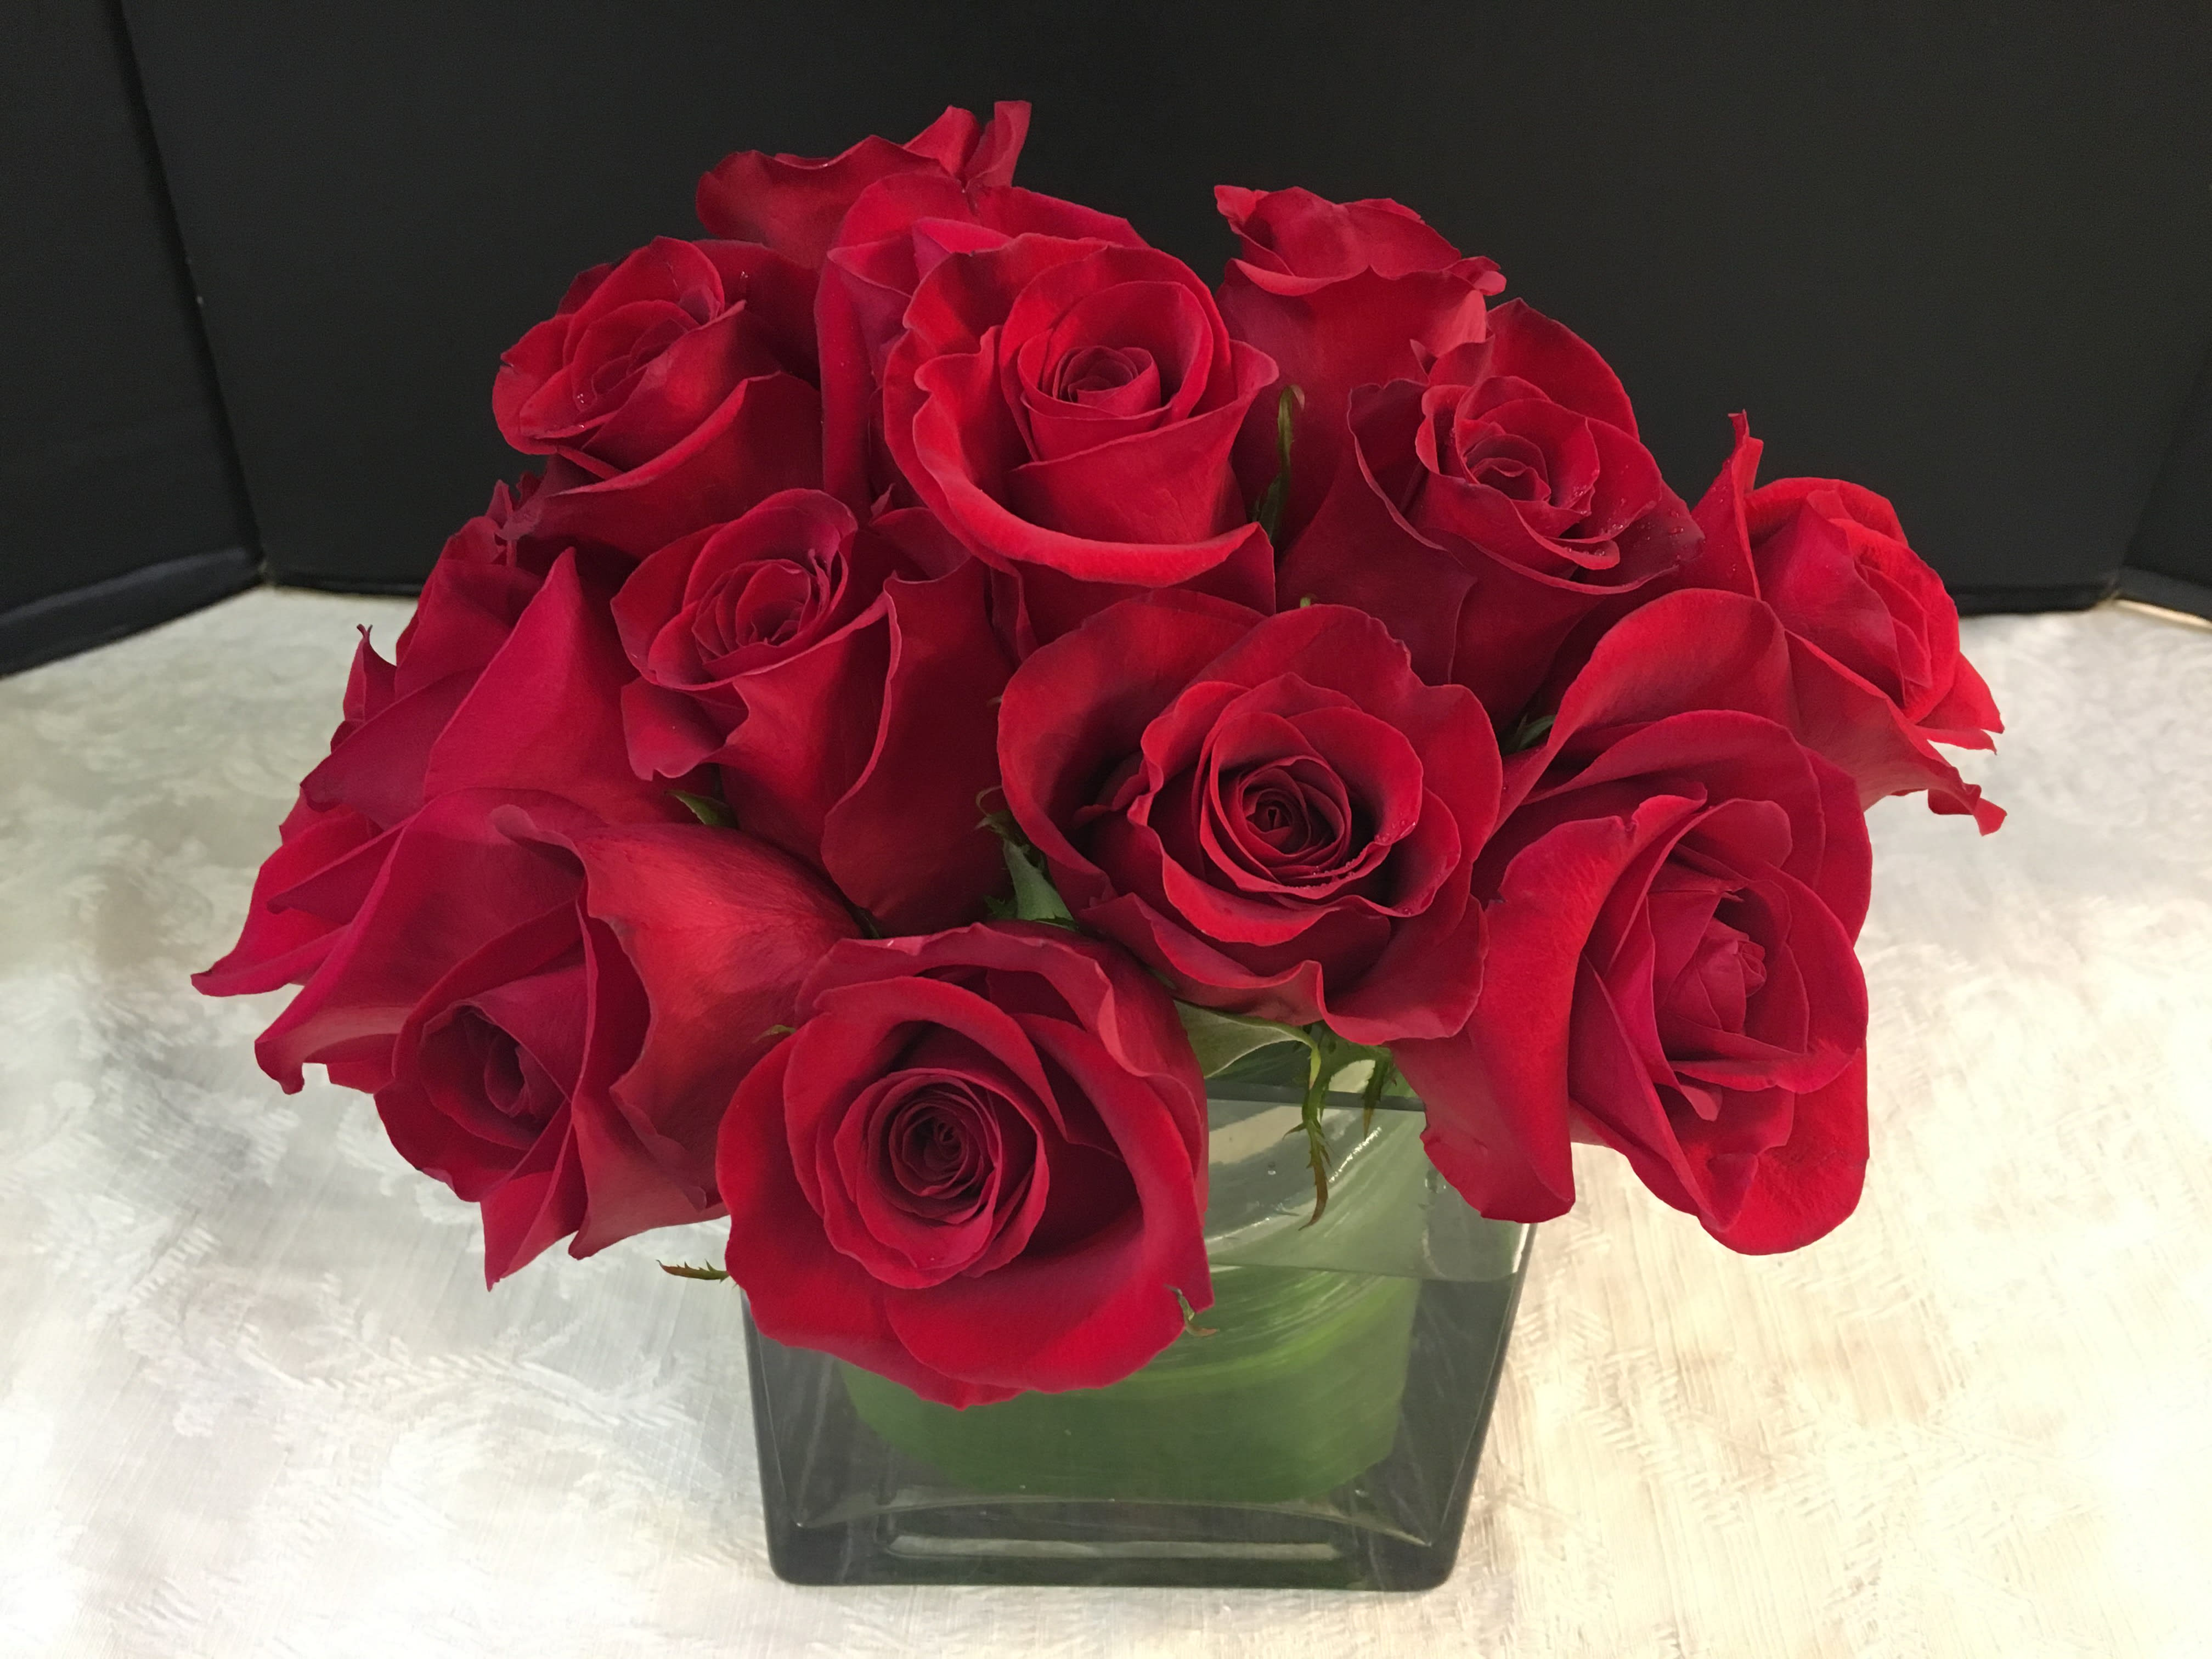 Rosy Patch - Premium  Red Roses with Fancy Greens. If you don' t desire Red  please specify.  Color may not be Available for Same Day Delivery. Call the Store for availability. (908) 234-2900 